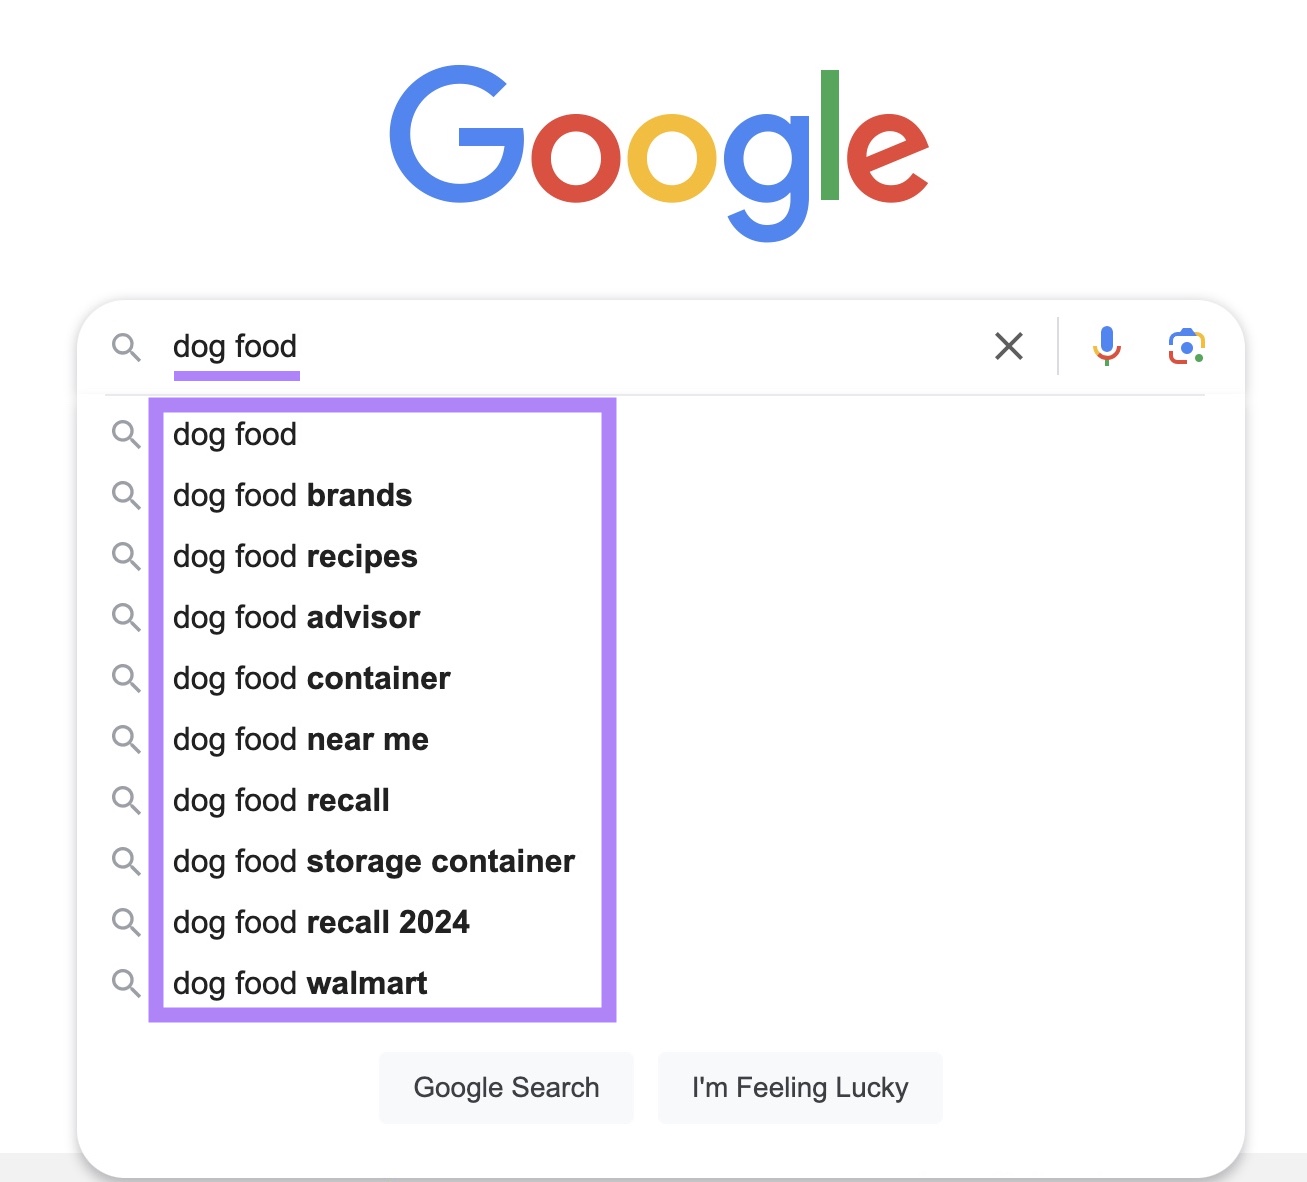 Google autocomplete suggestions for "dog food"